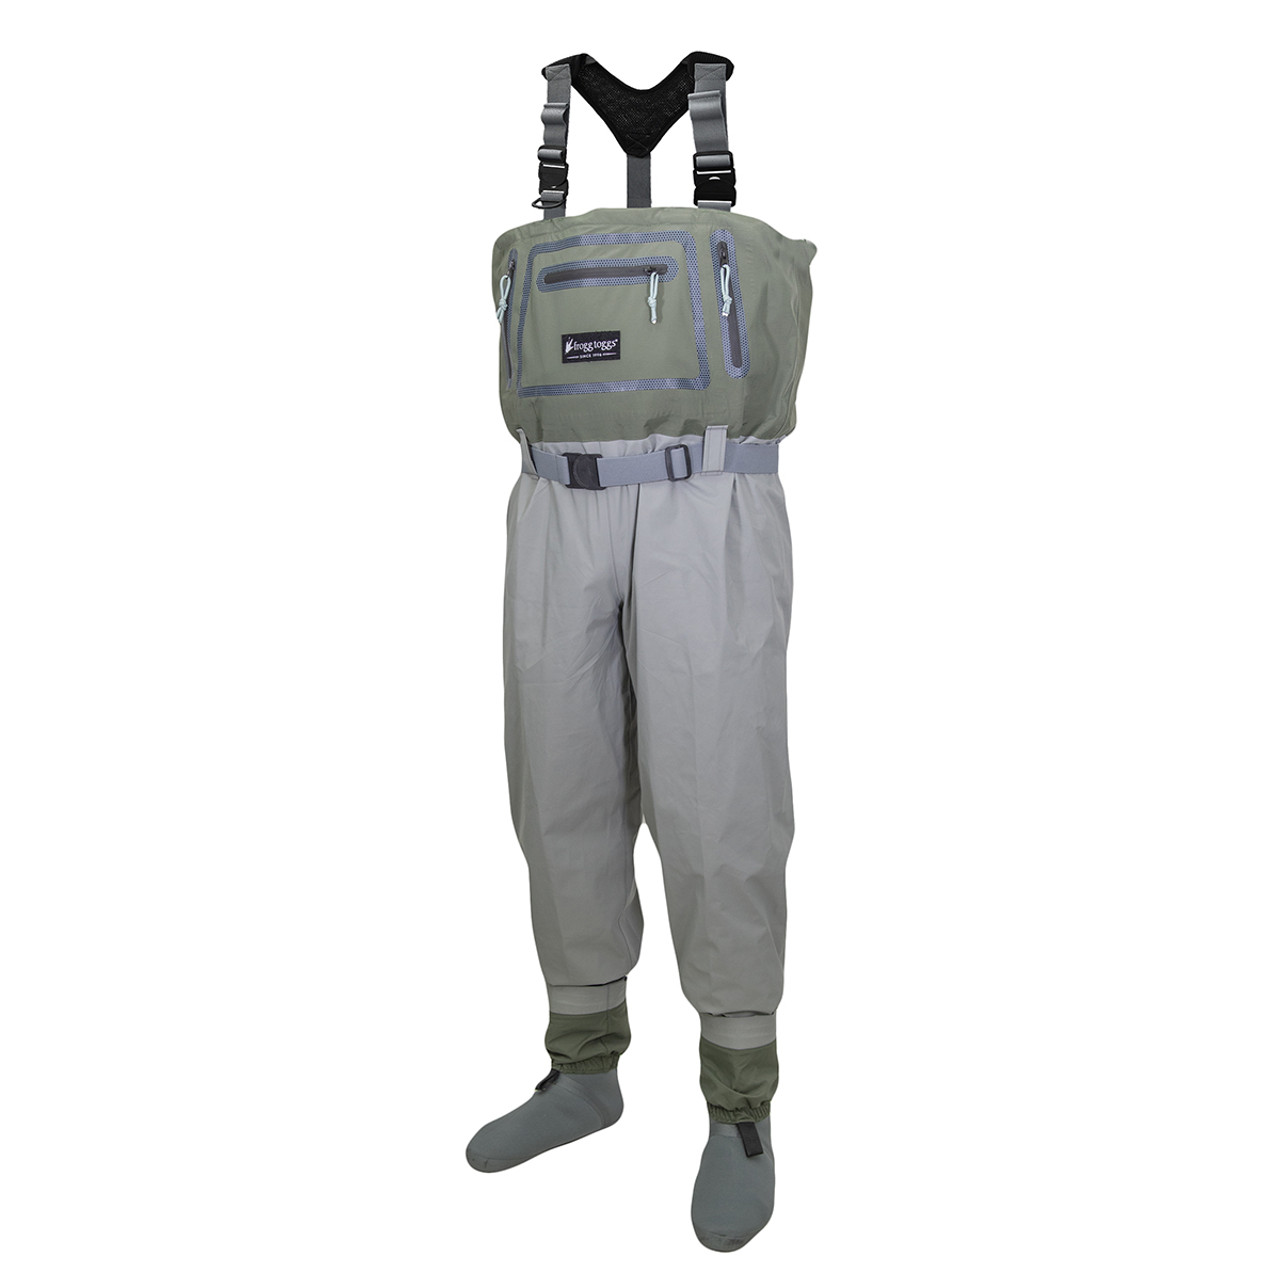 Frogg Toggs Men's Hellbender Elite Ultra-Light Stockingfoot Chest Wader in Gray/Green, Size Large